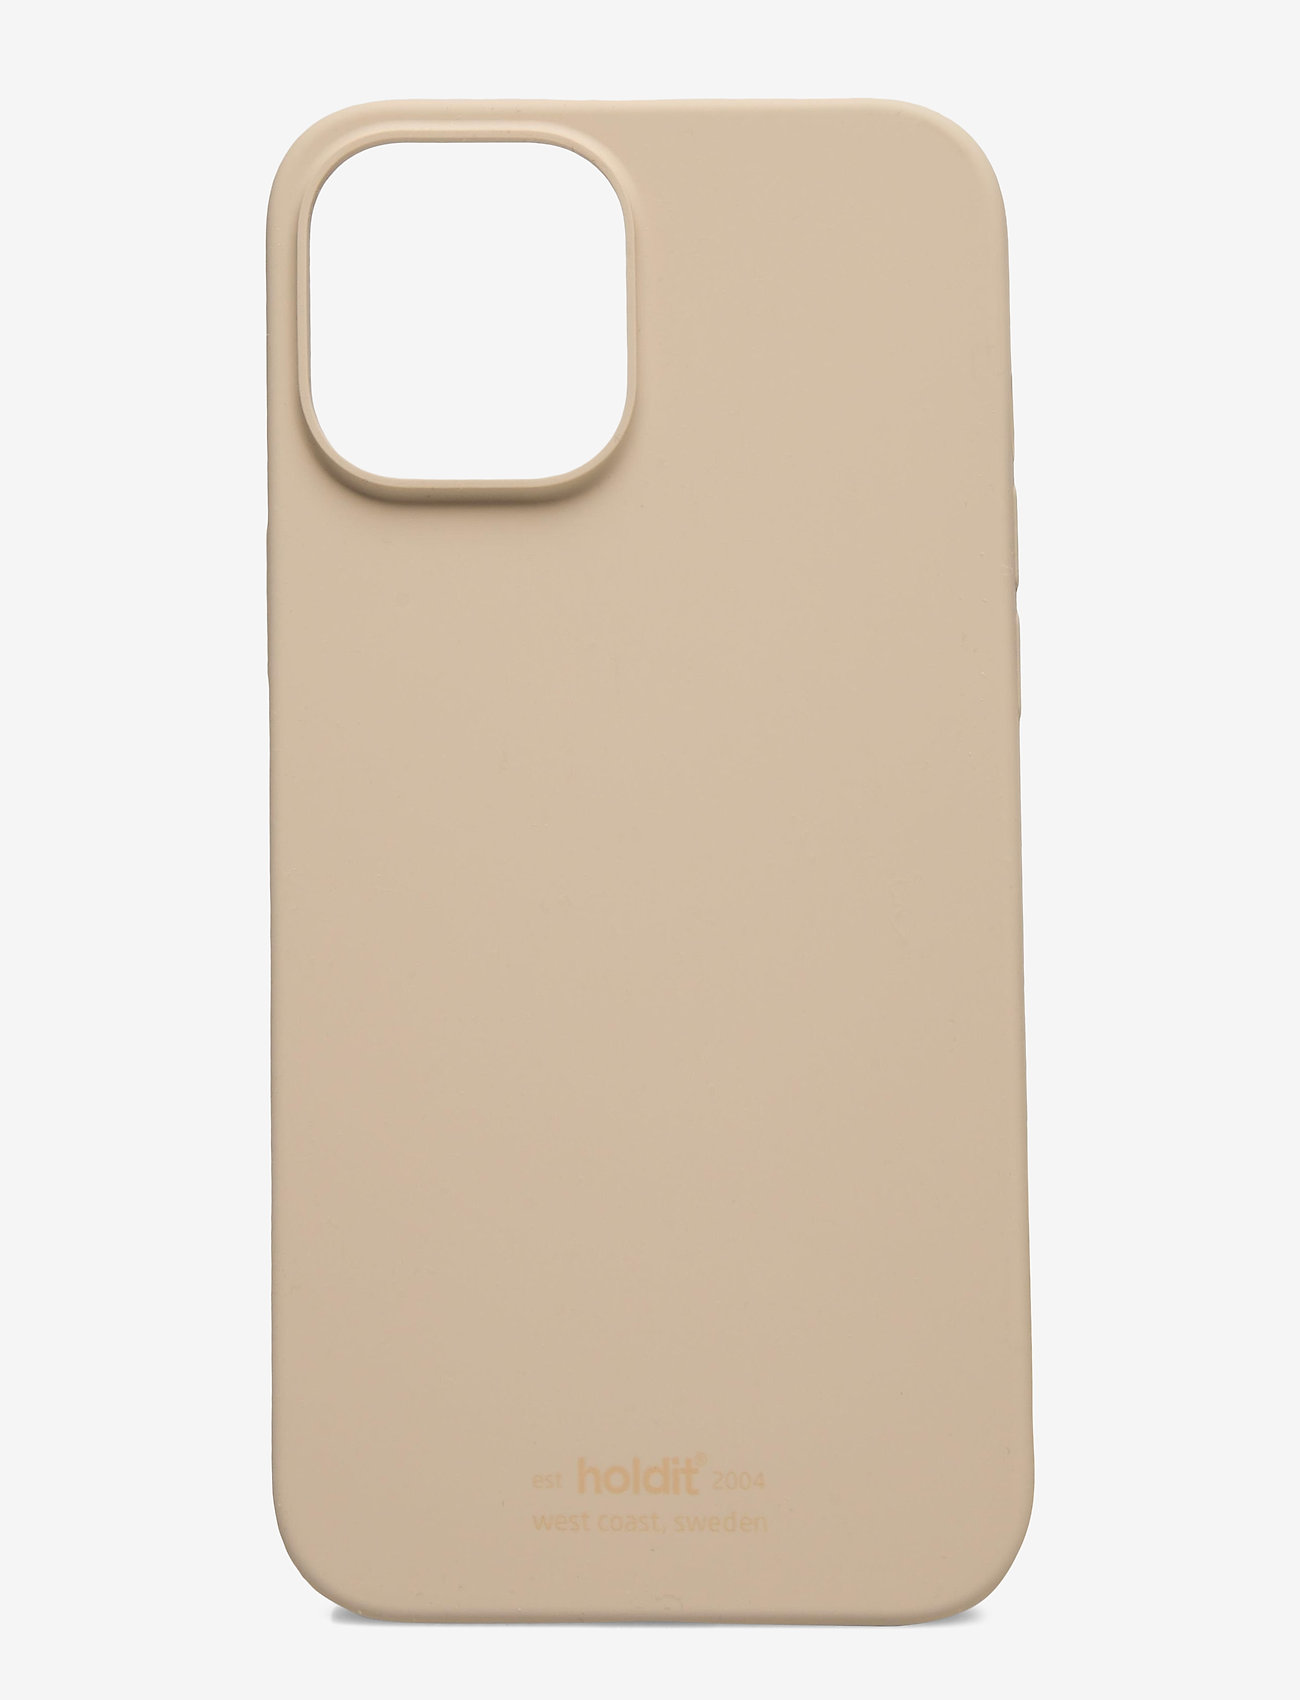 Holdit - Silicone Case iPhone 12Pro Max - lowest prices - beige - 0